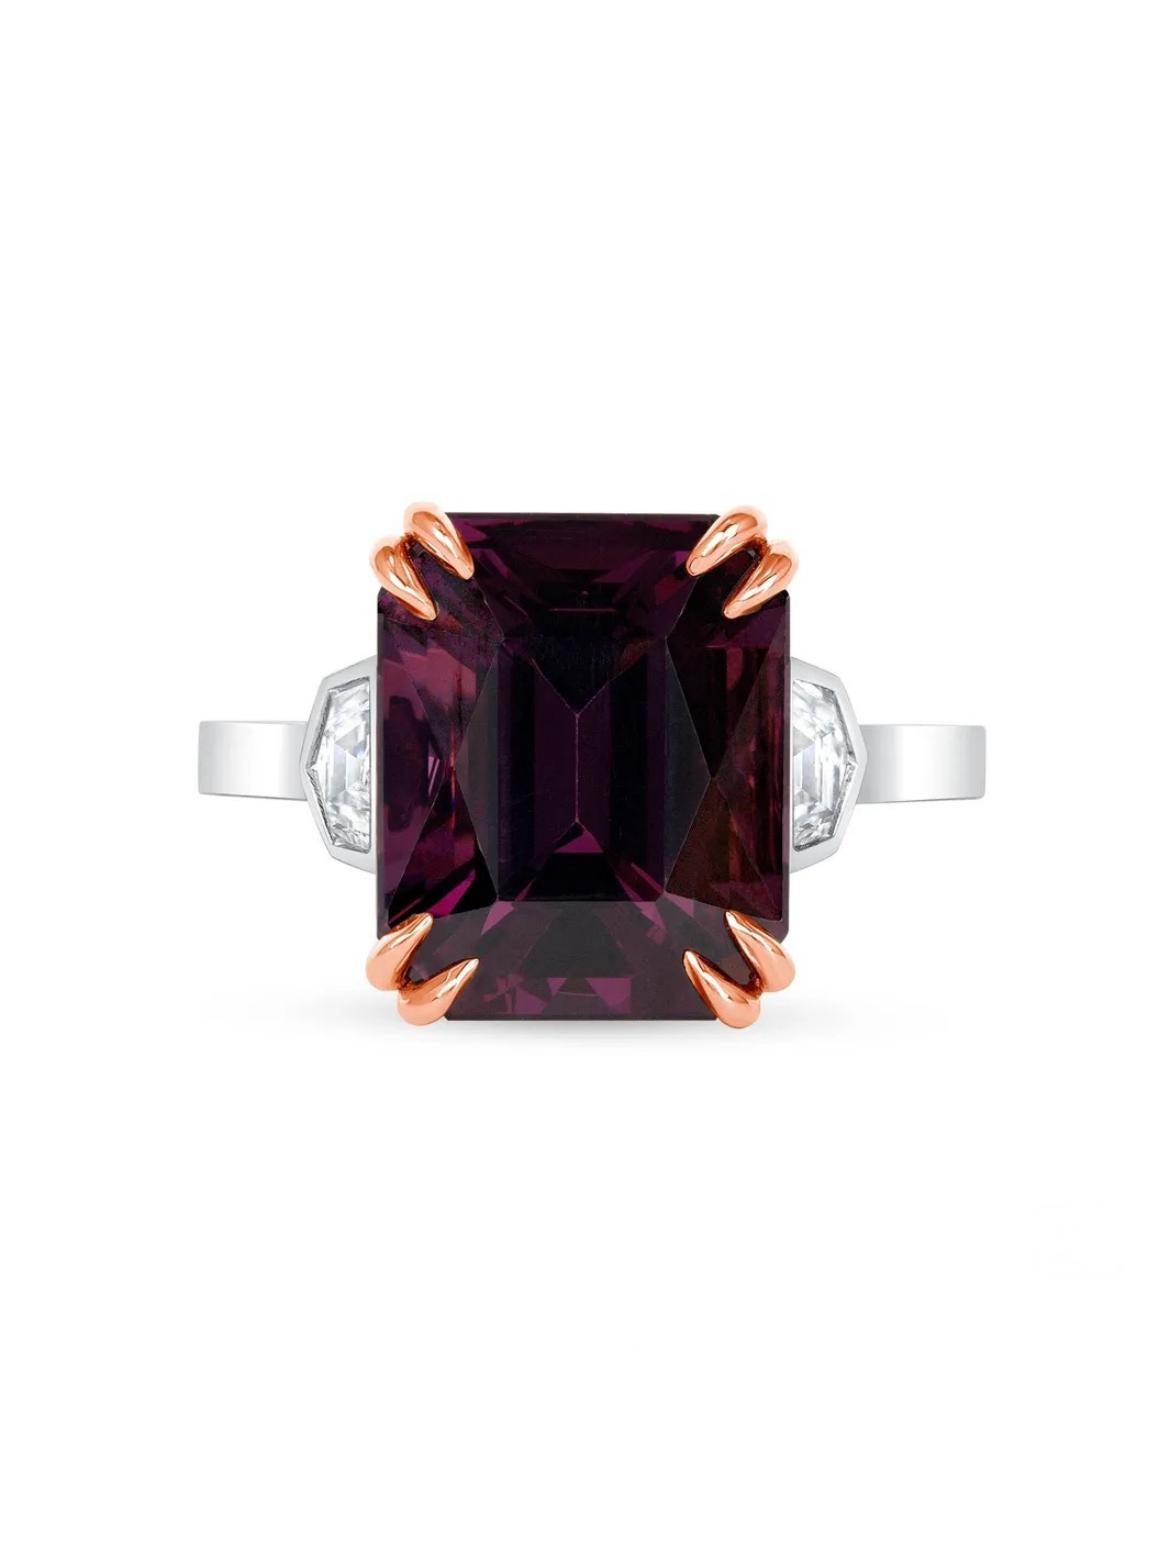 Modern 7.39ct untreated emerald-cut purple Spinel ring. GIA certified. 